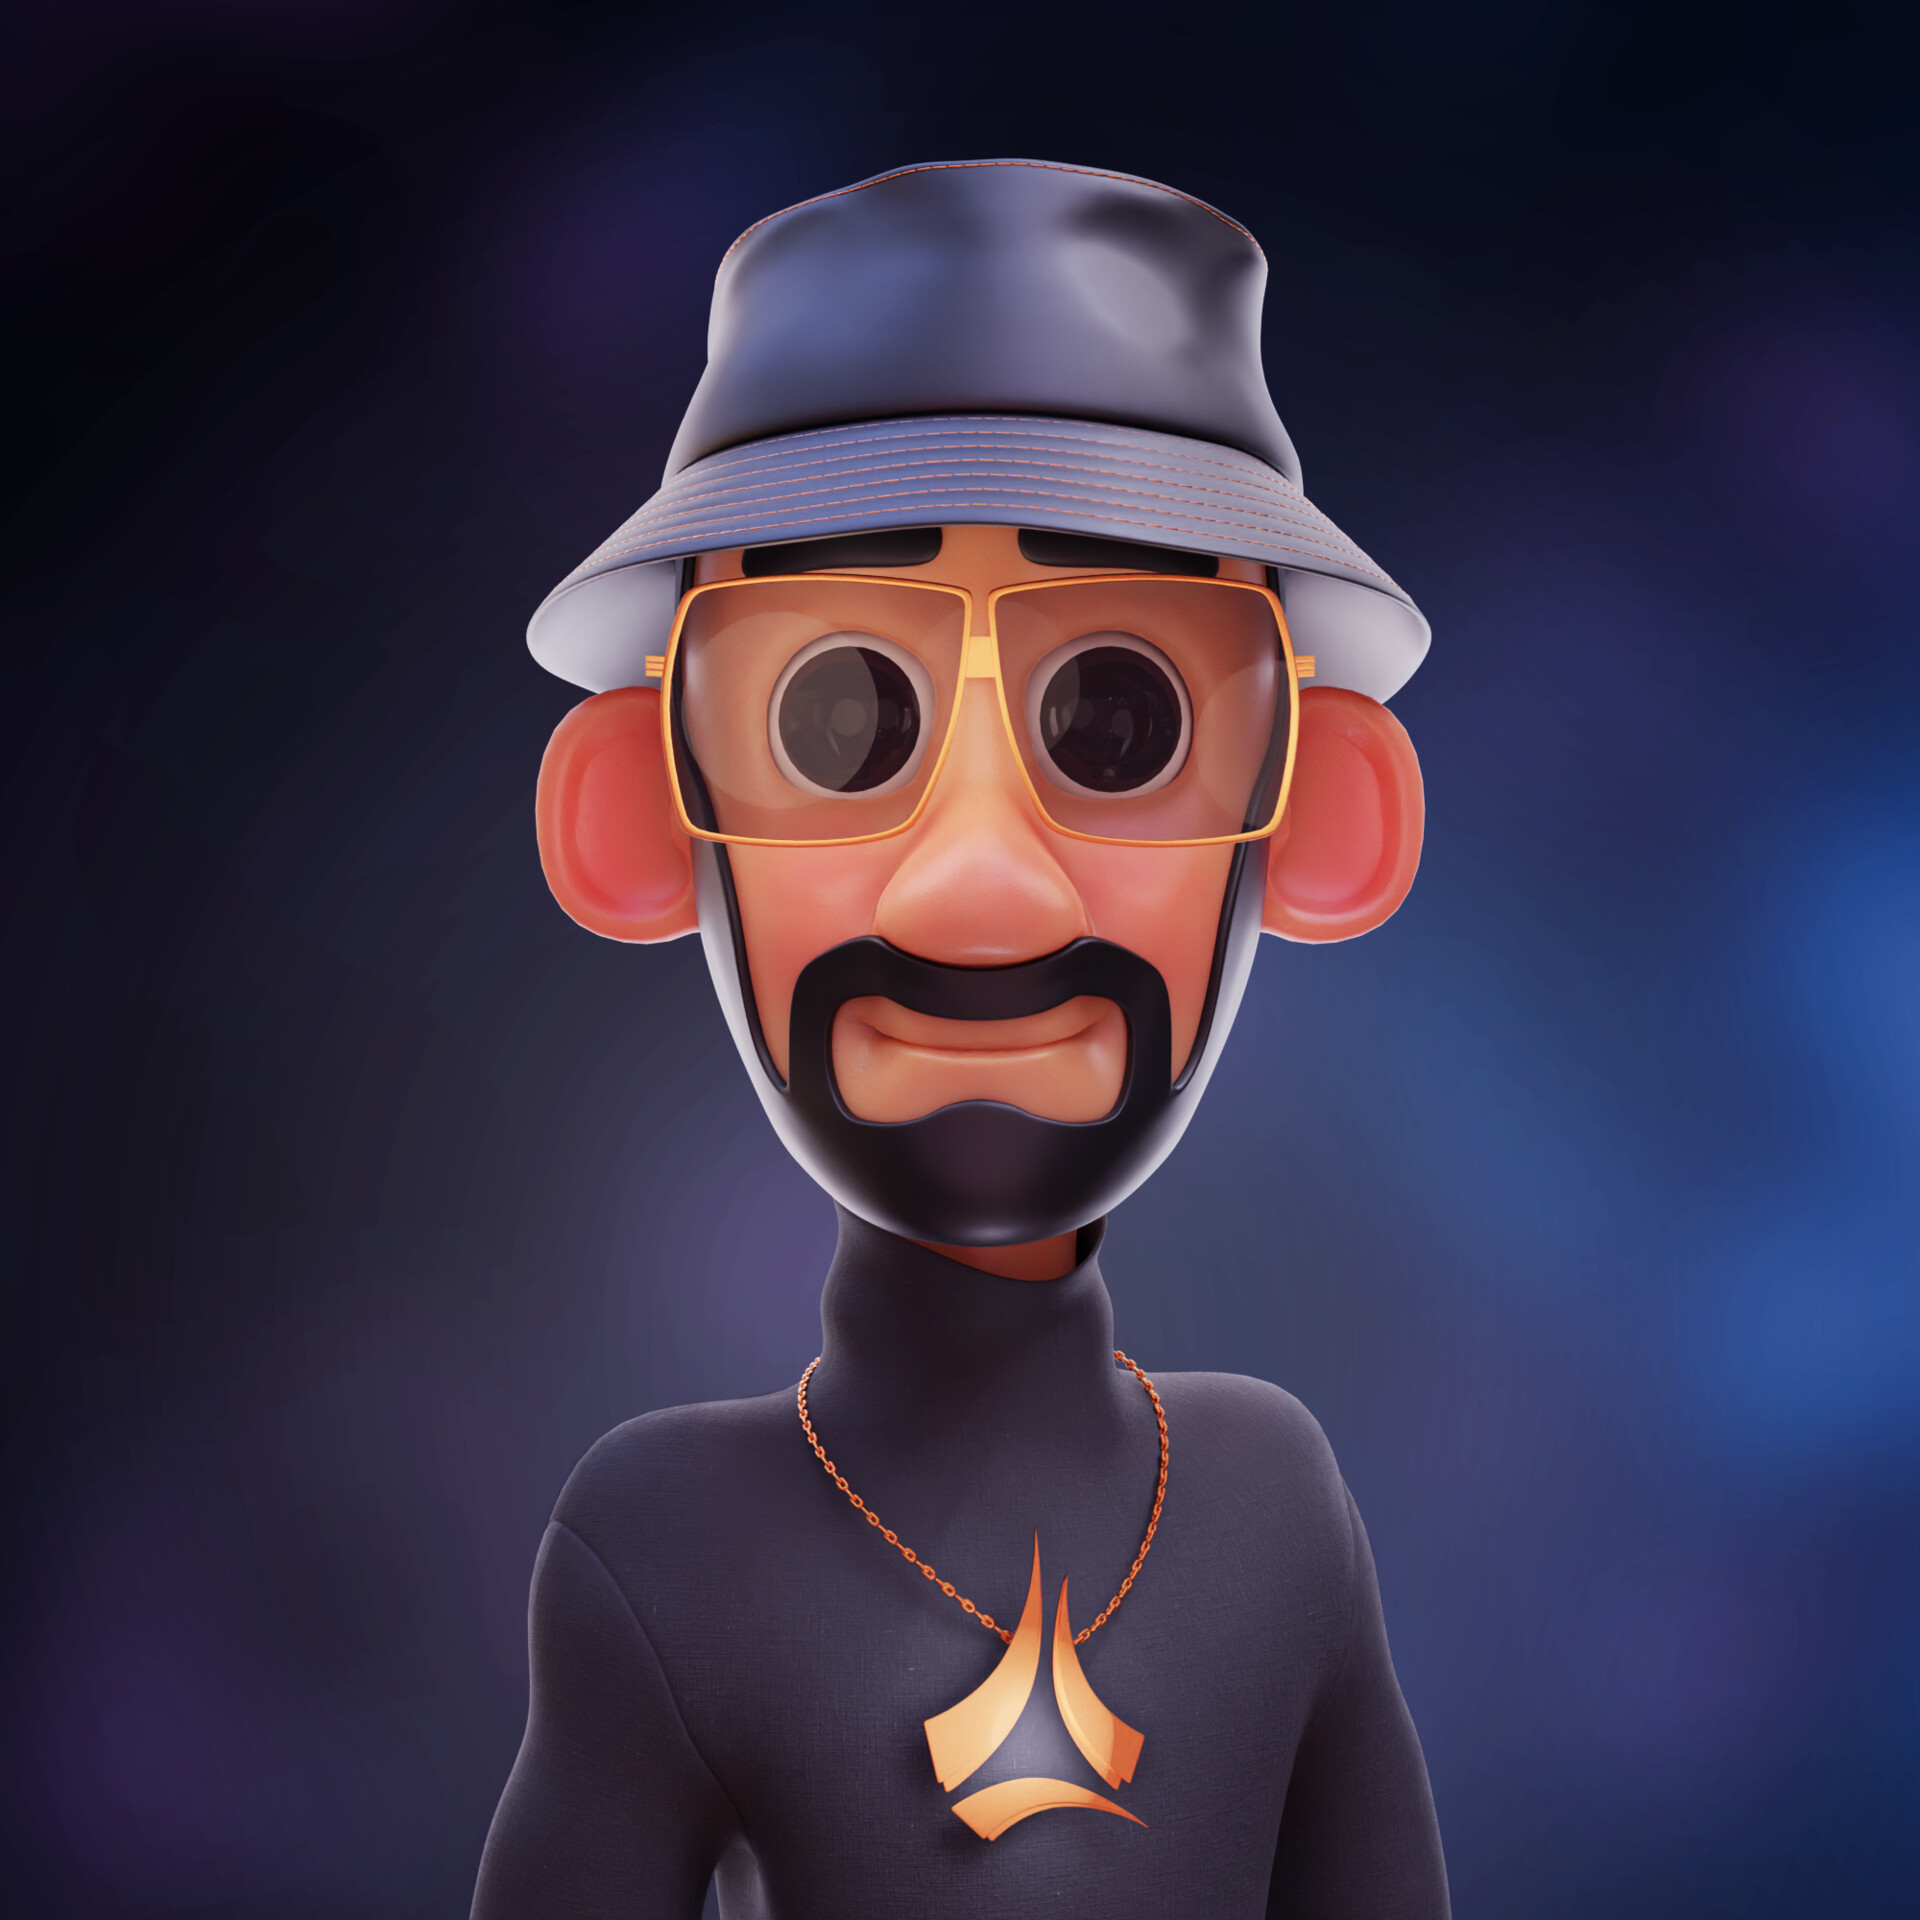 ArtStation - 3D cartoon character NFT style with blender